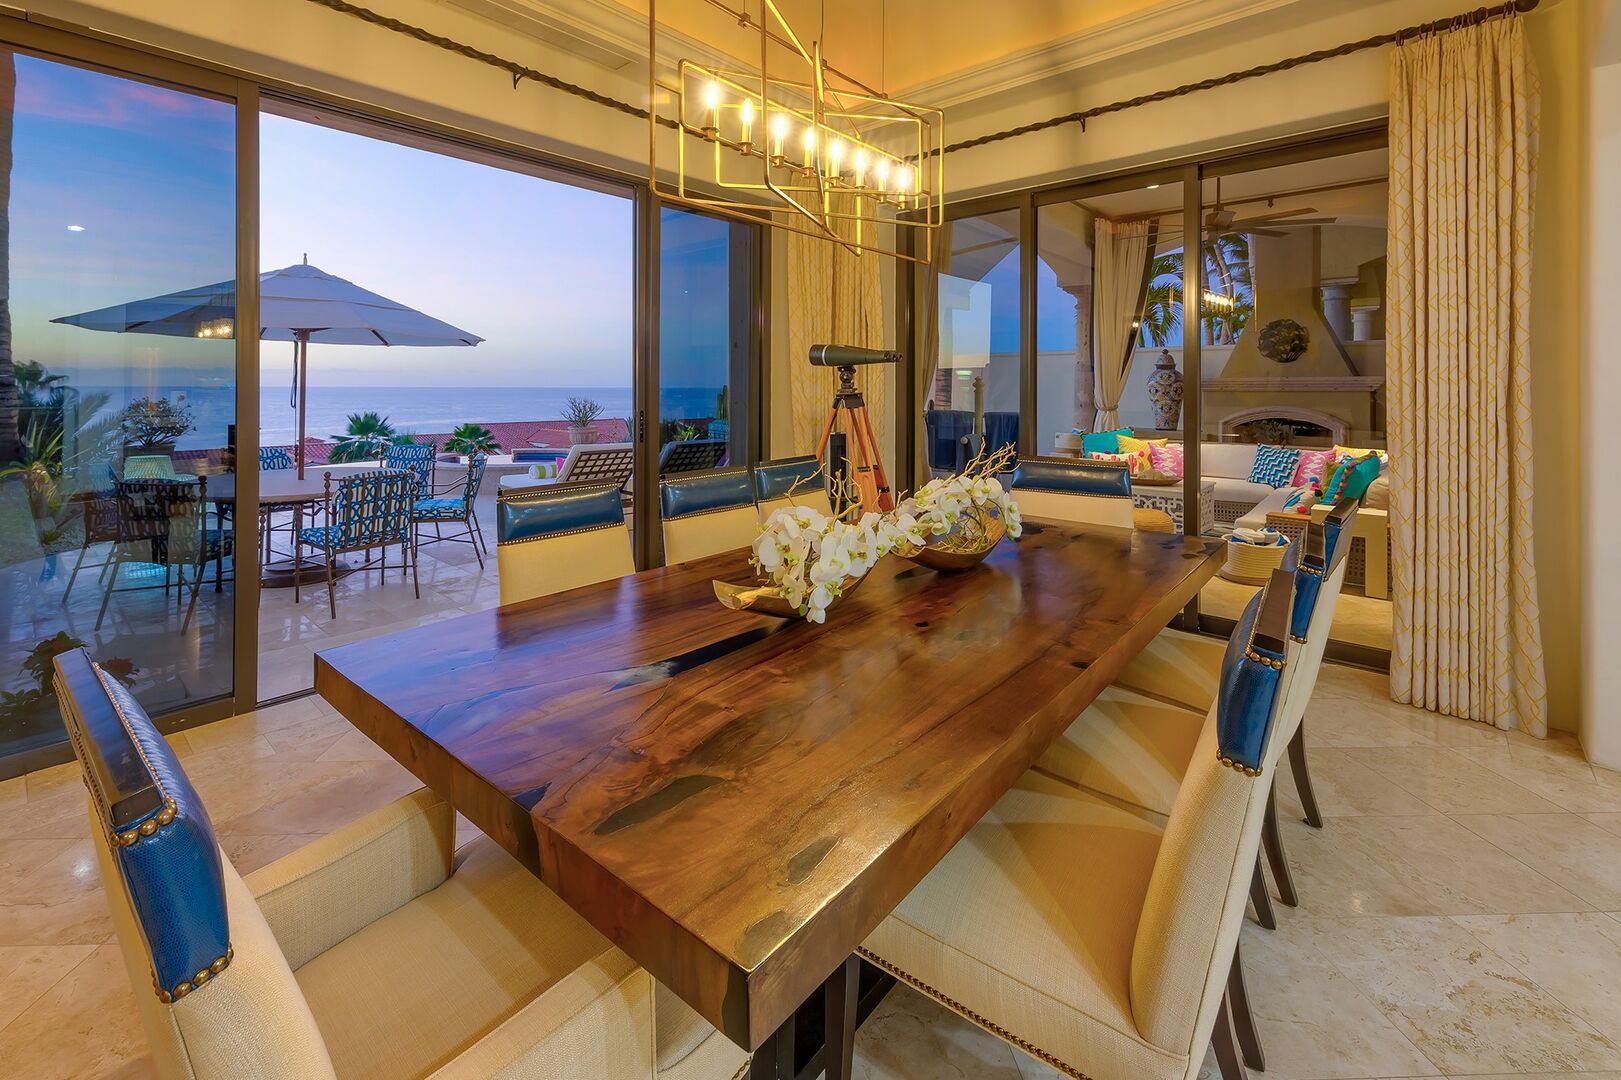 A dining table with 8 chairs near an open sliding door leading to the pool patio.